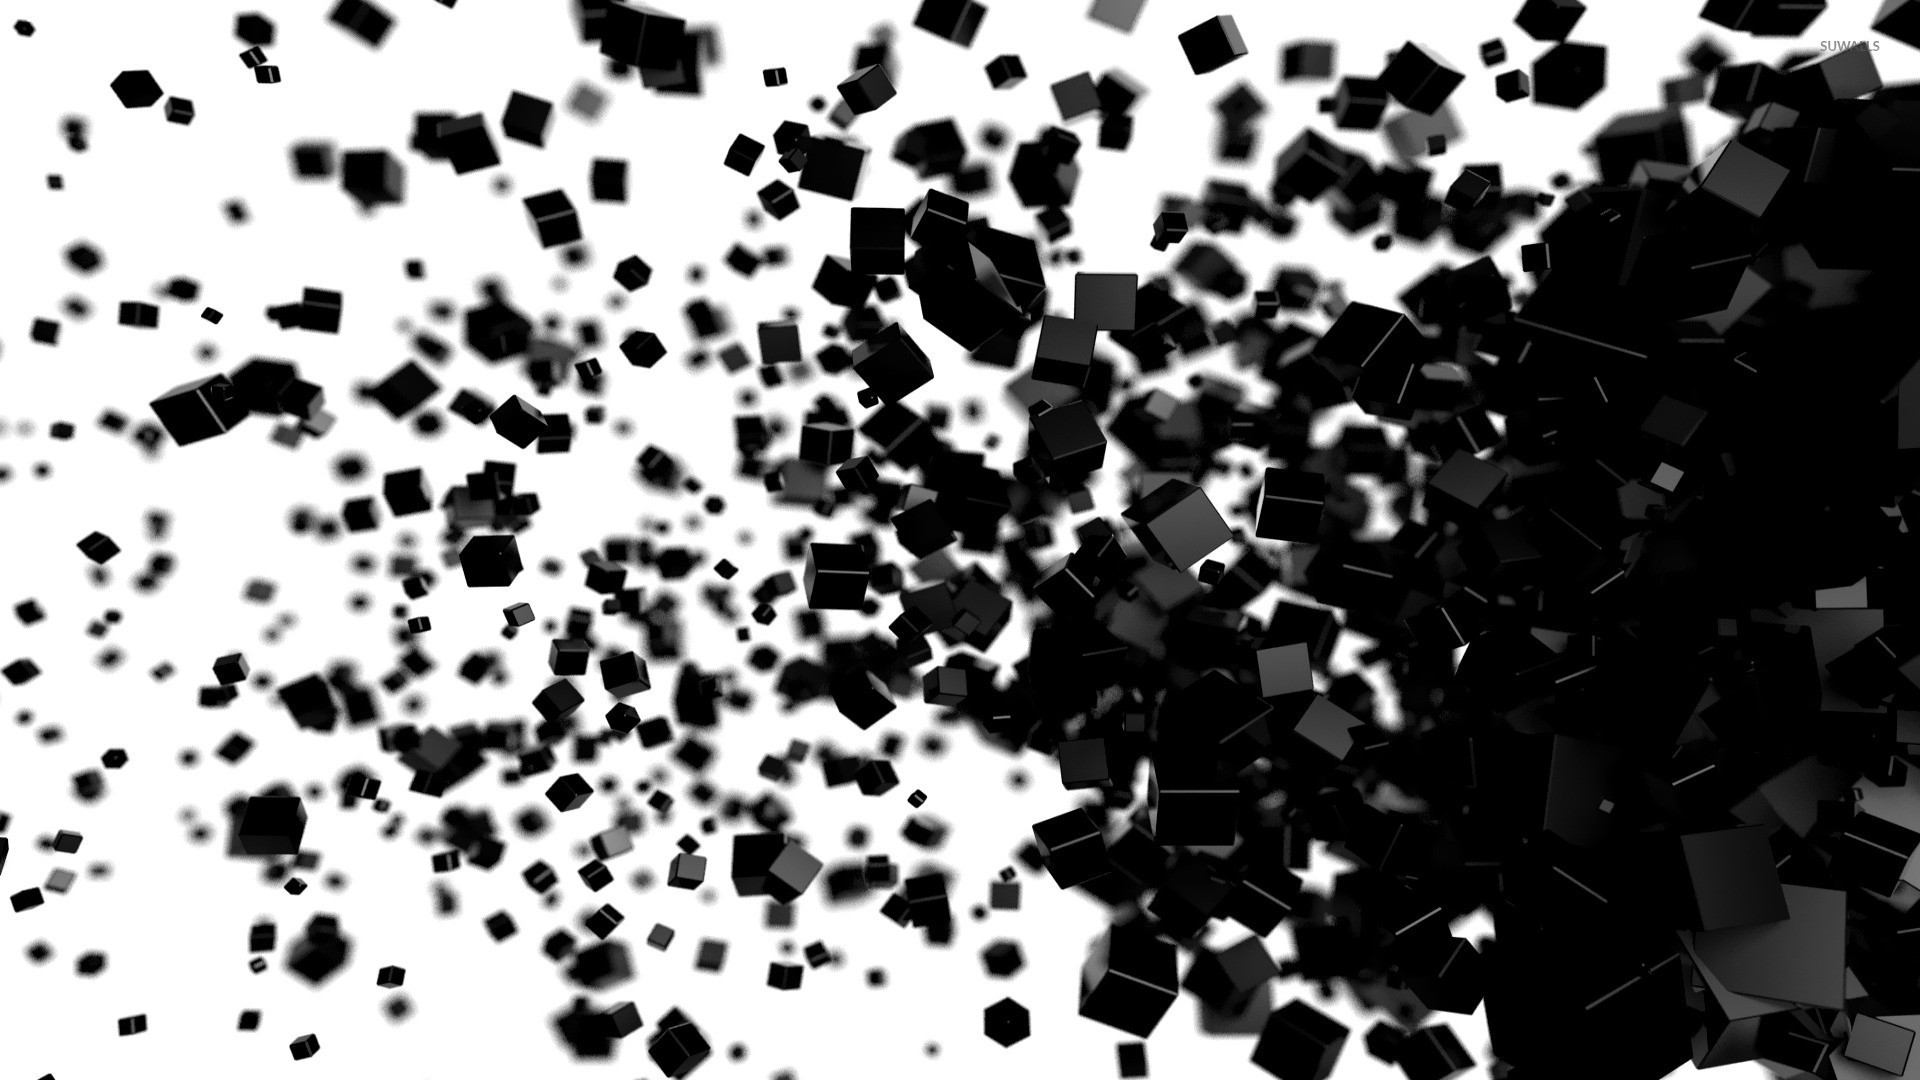 1920x1080 Black and White Cube Wallpaper Wonderful Exploding Cubes Wallpaper 3d  Wallpapers